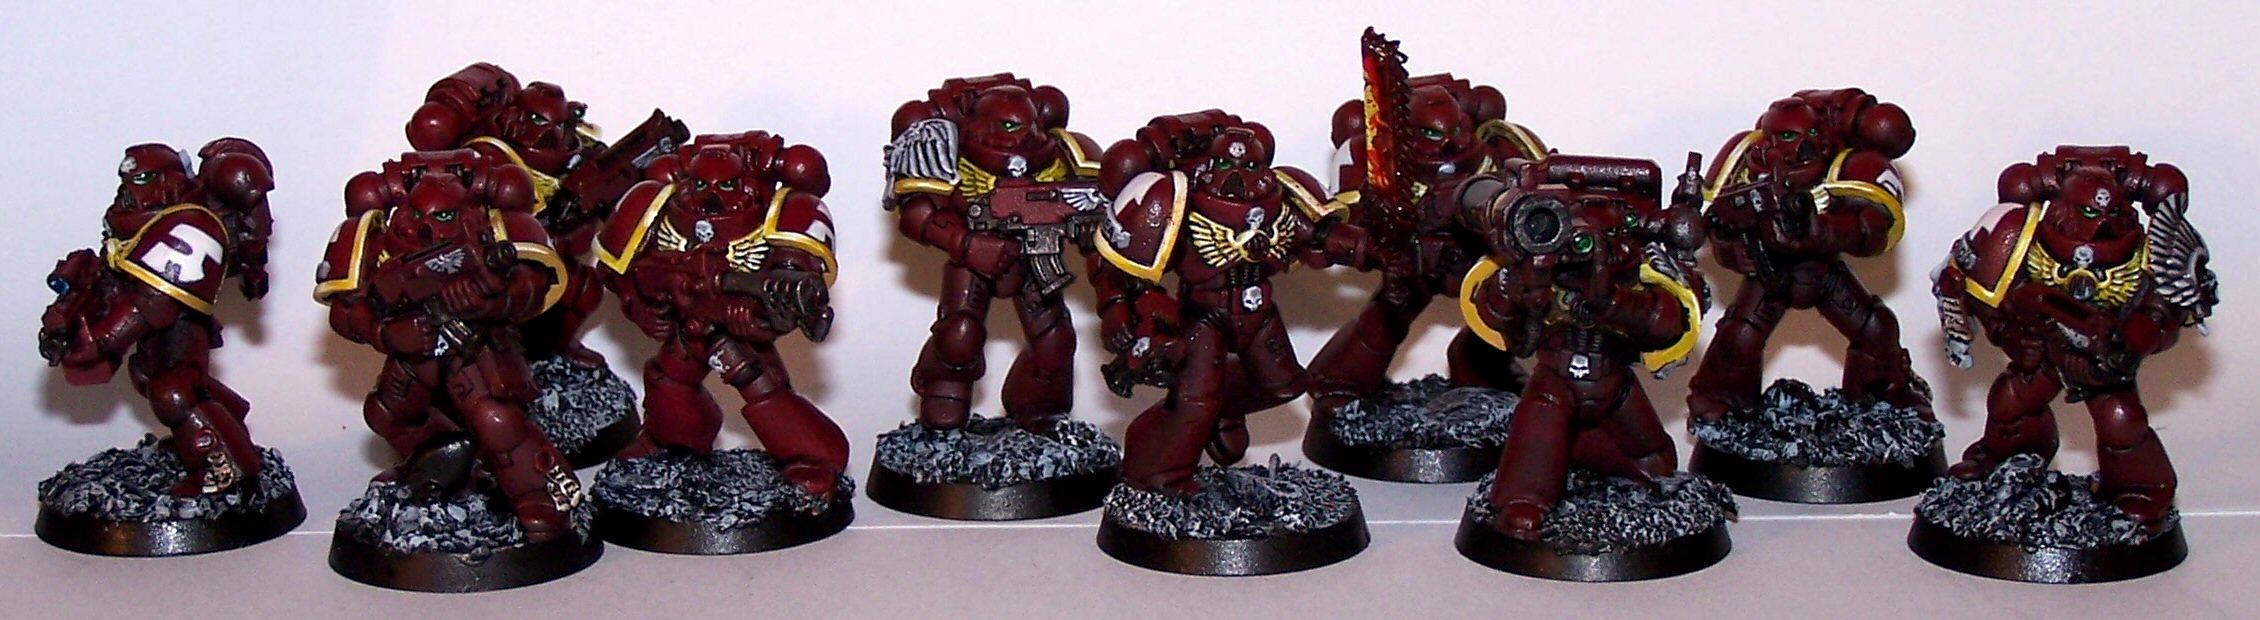 Emperor's Wings, Flamer, Missile Launcher, Rubble Bases, Serg, Sergeant, Space Marines, Tactical Squad